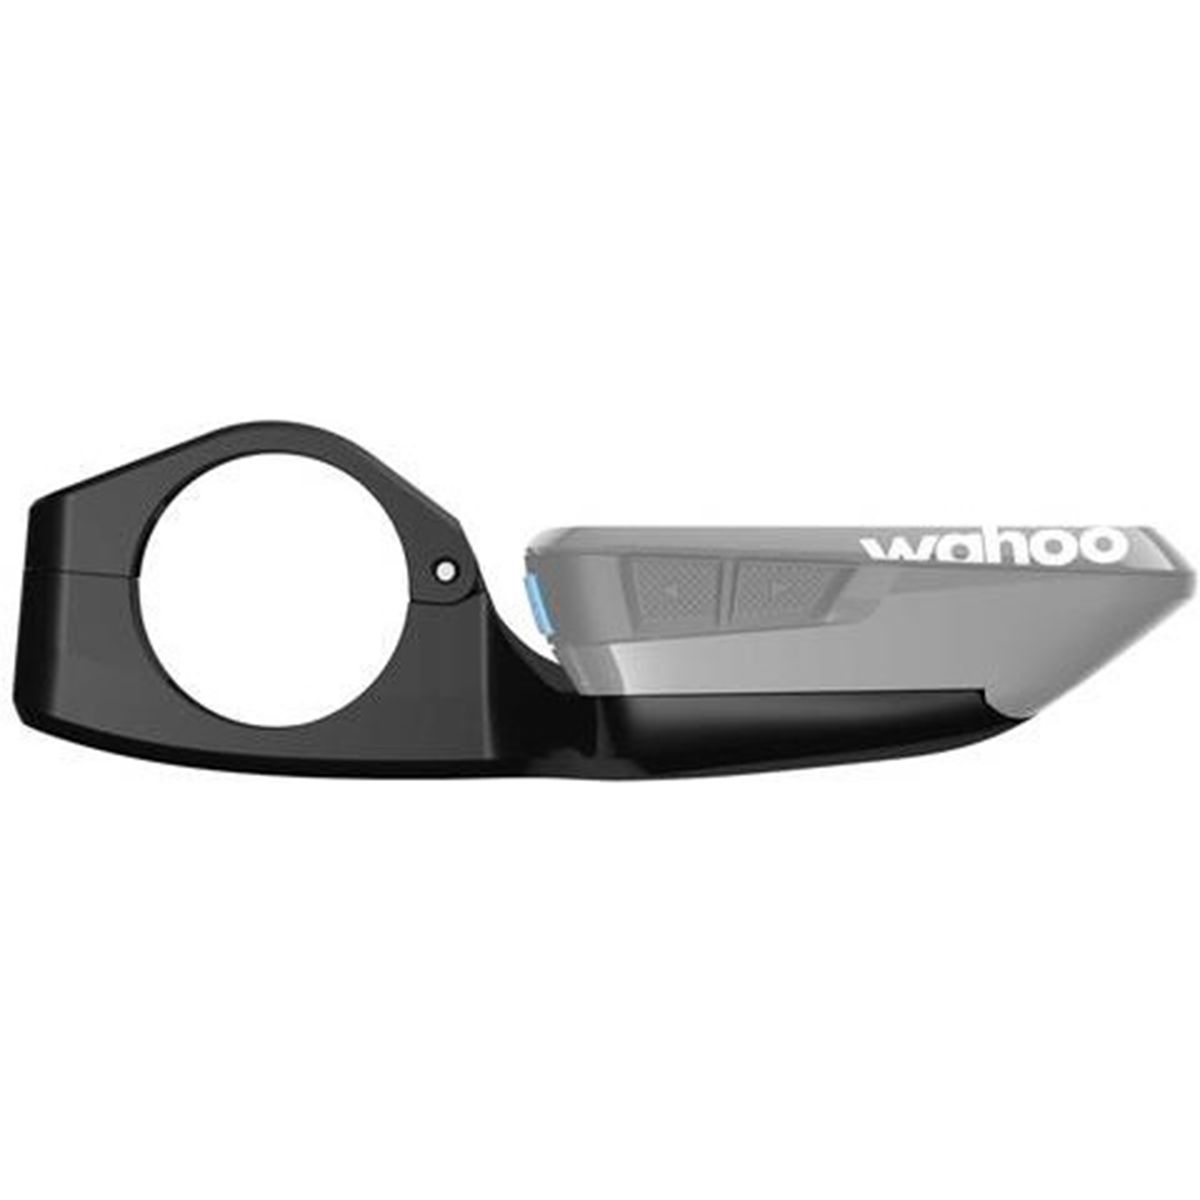 Wahoo Fitness ELEMNT BOLT Computer Out Front Mount